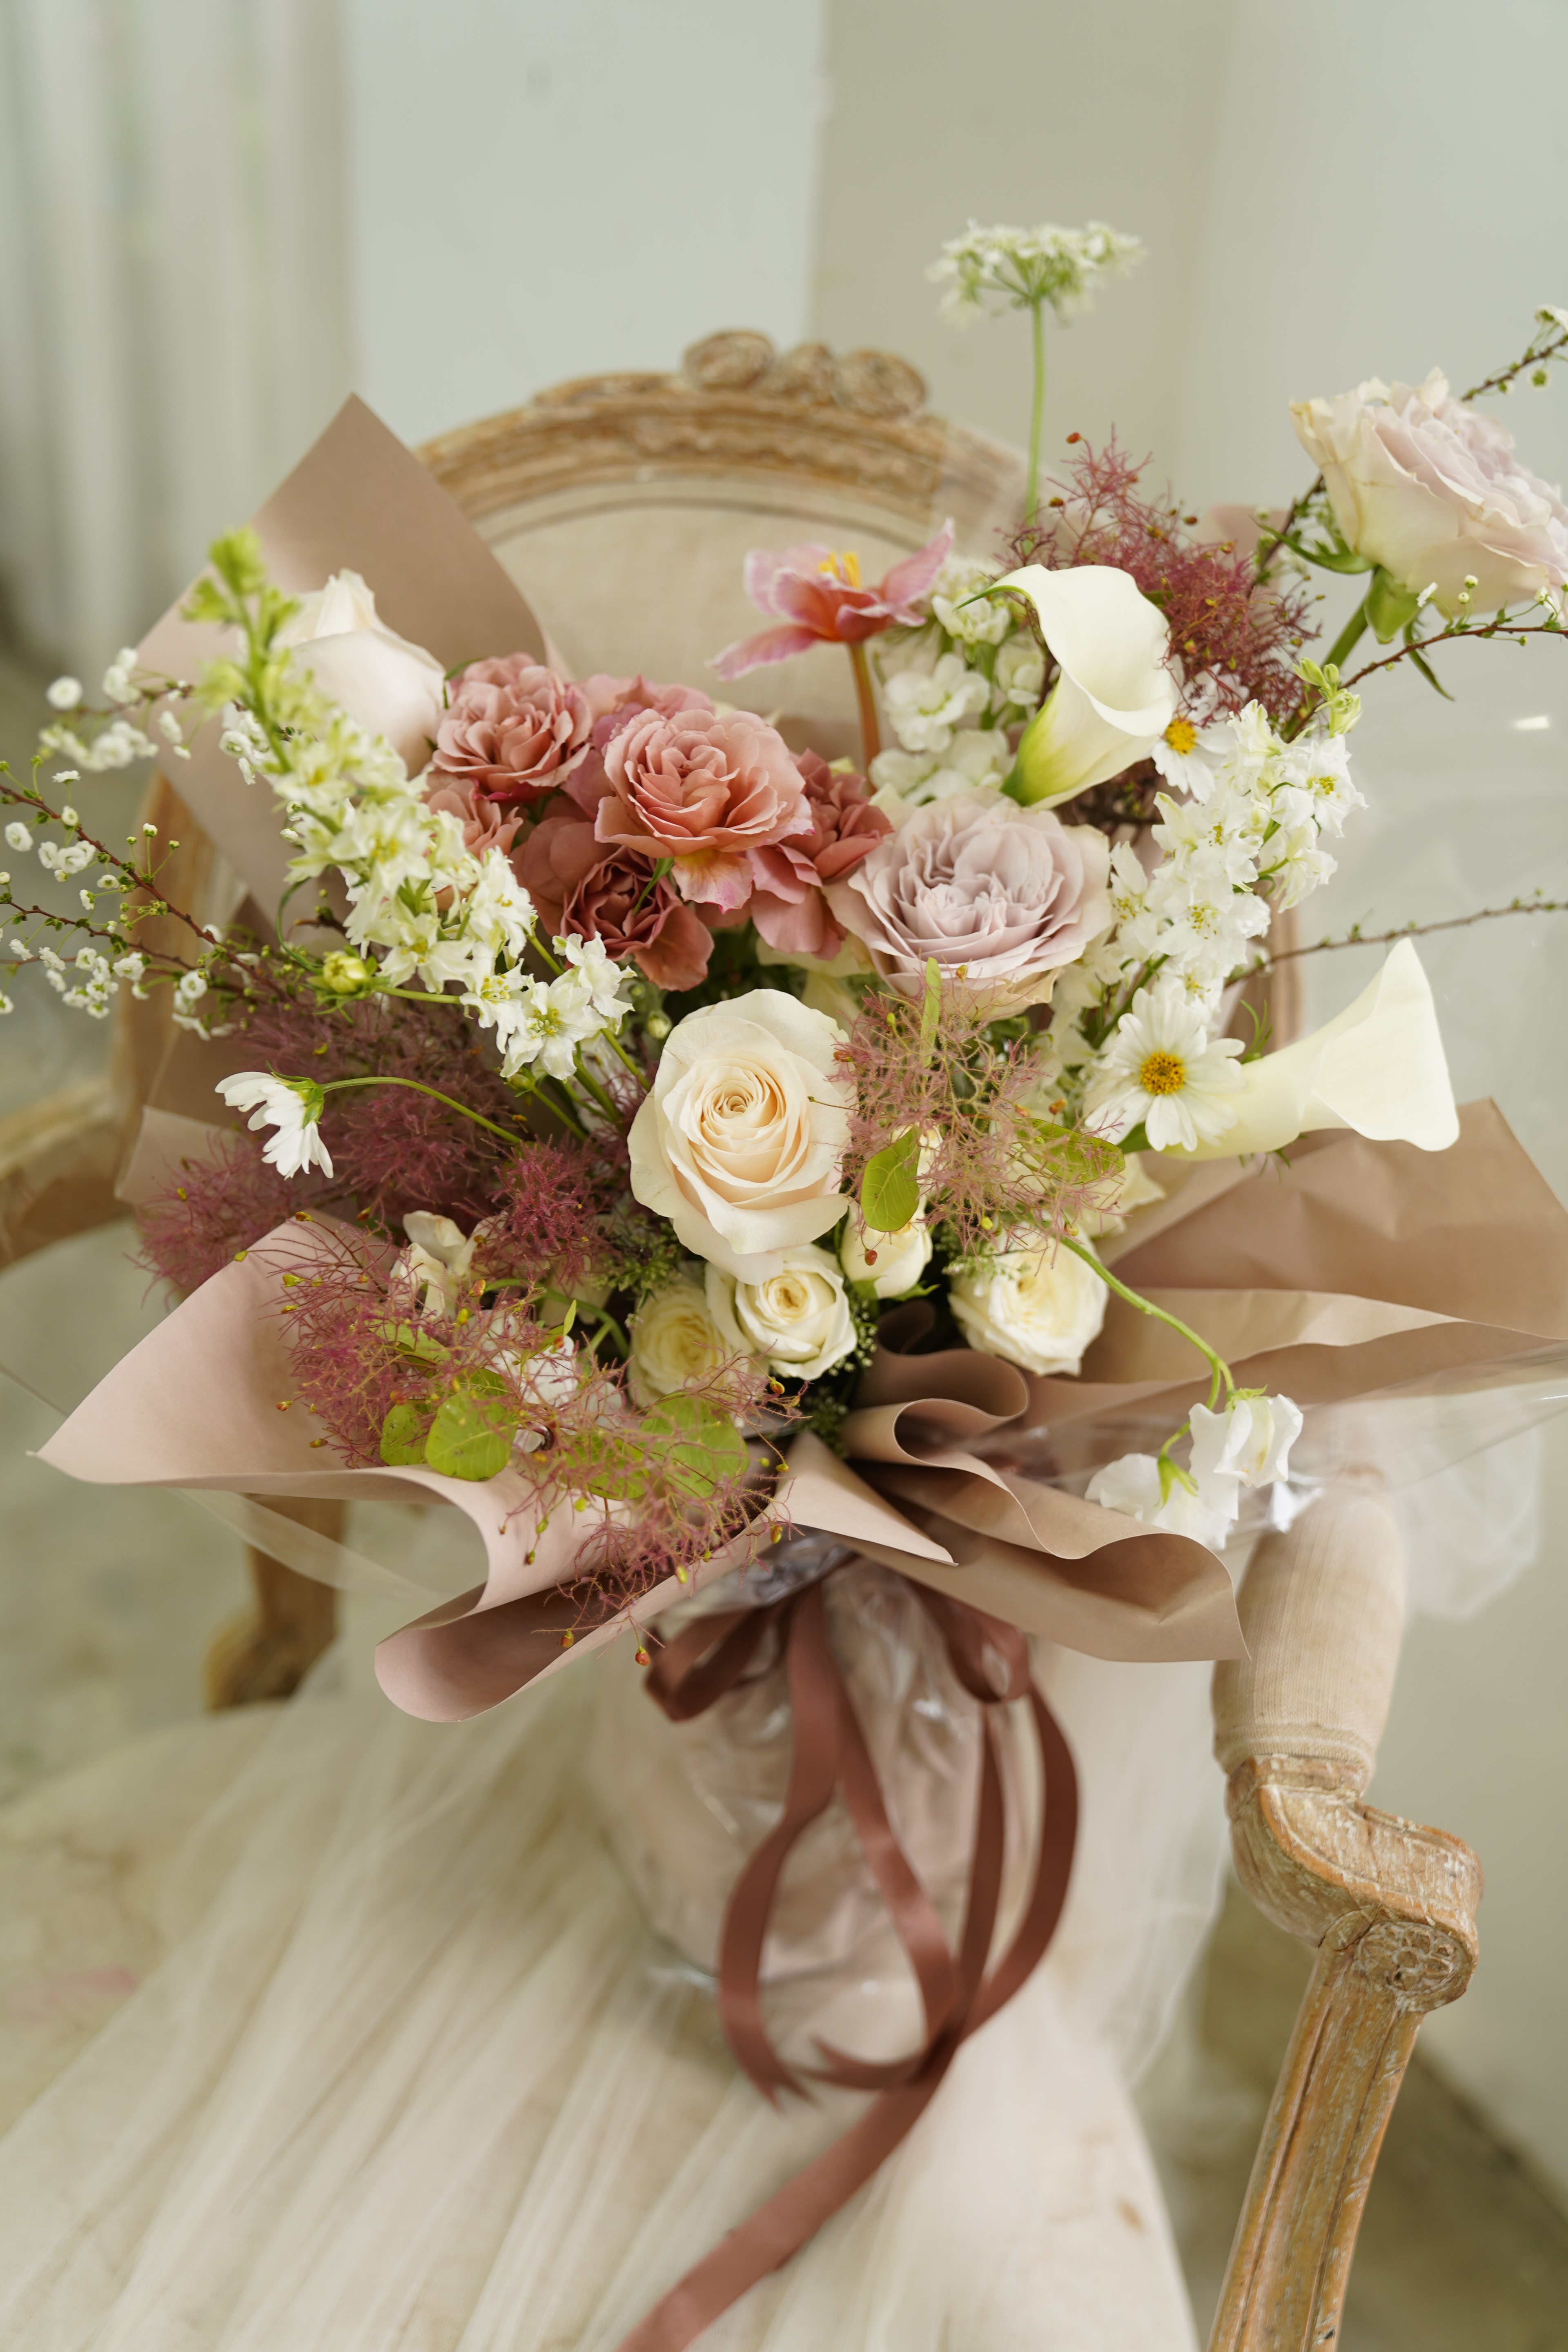 Bouquets by Art Flower Design 花點時間 All right reserved